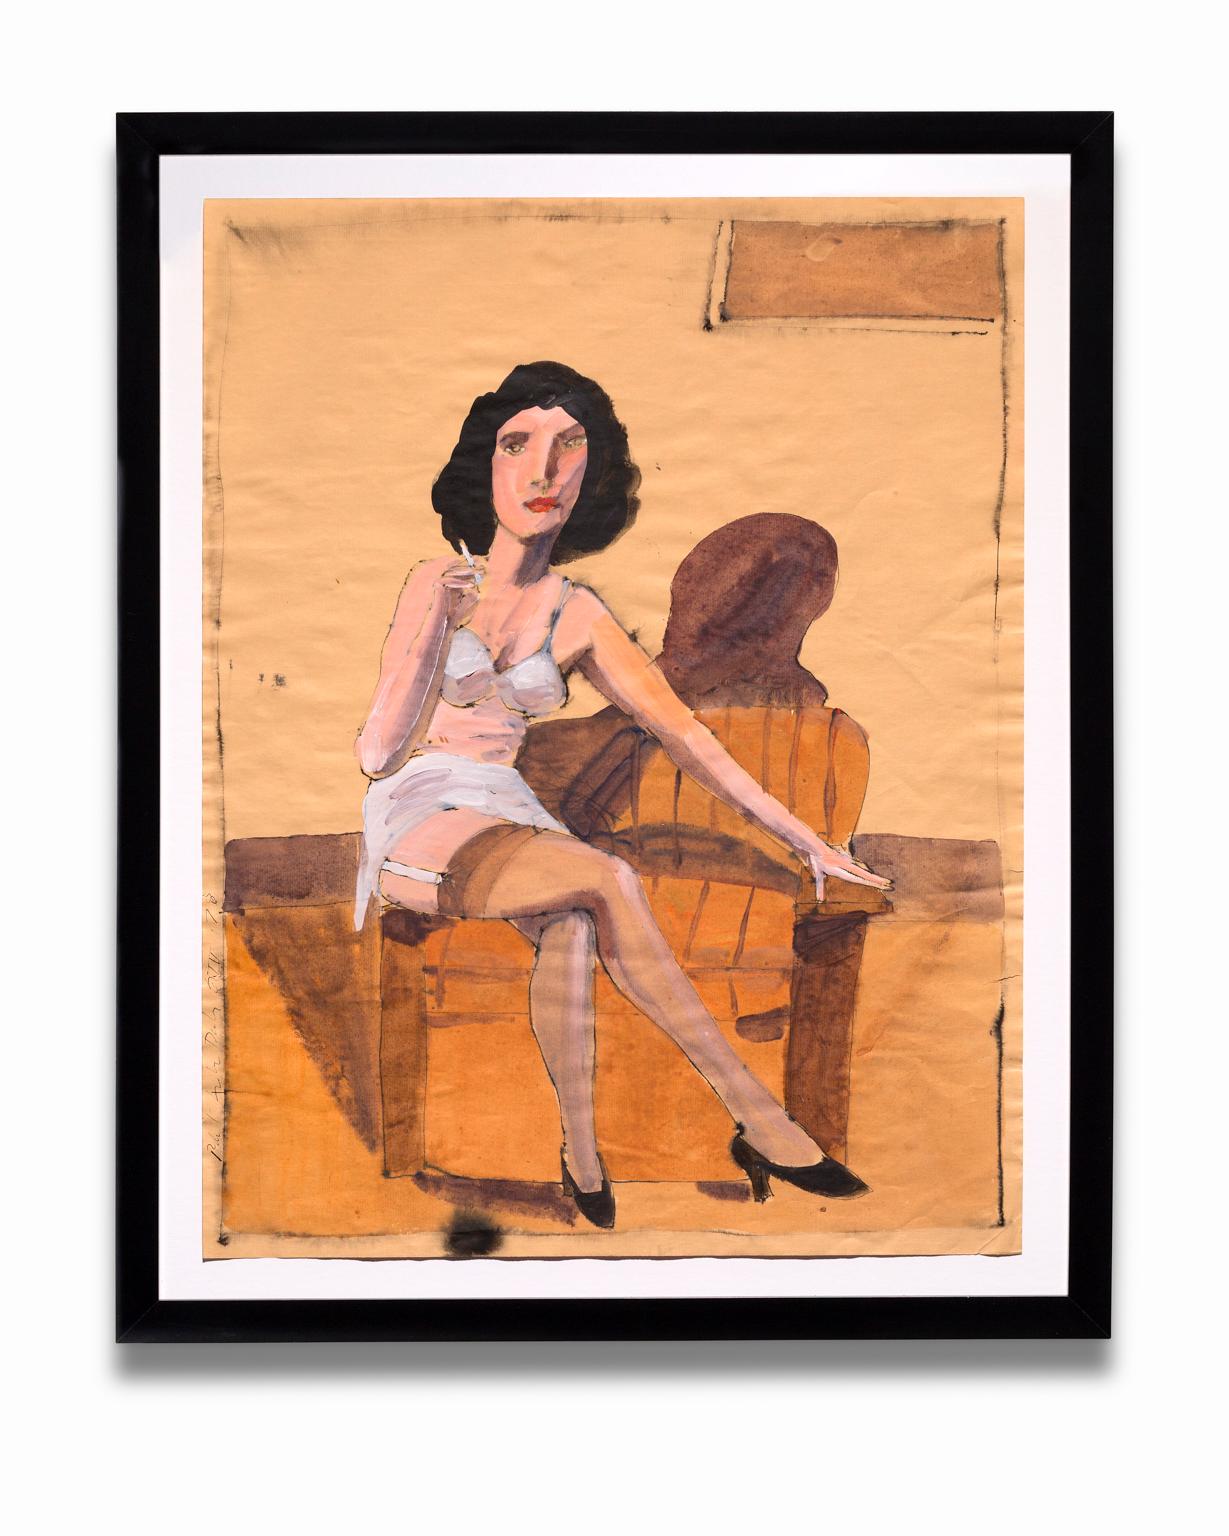 "Seated Figure With Cigarette", Partially Nude Female, Watercolor on Paper